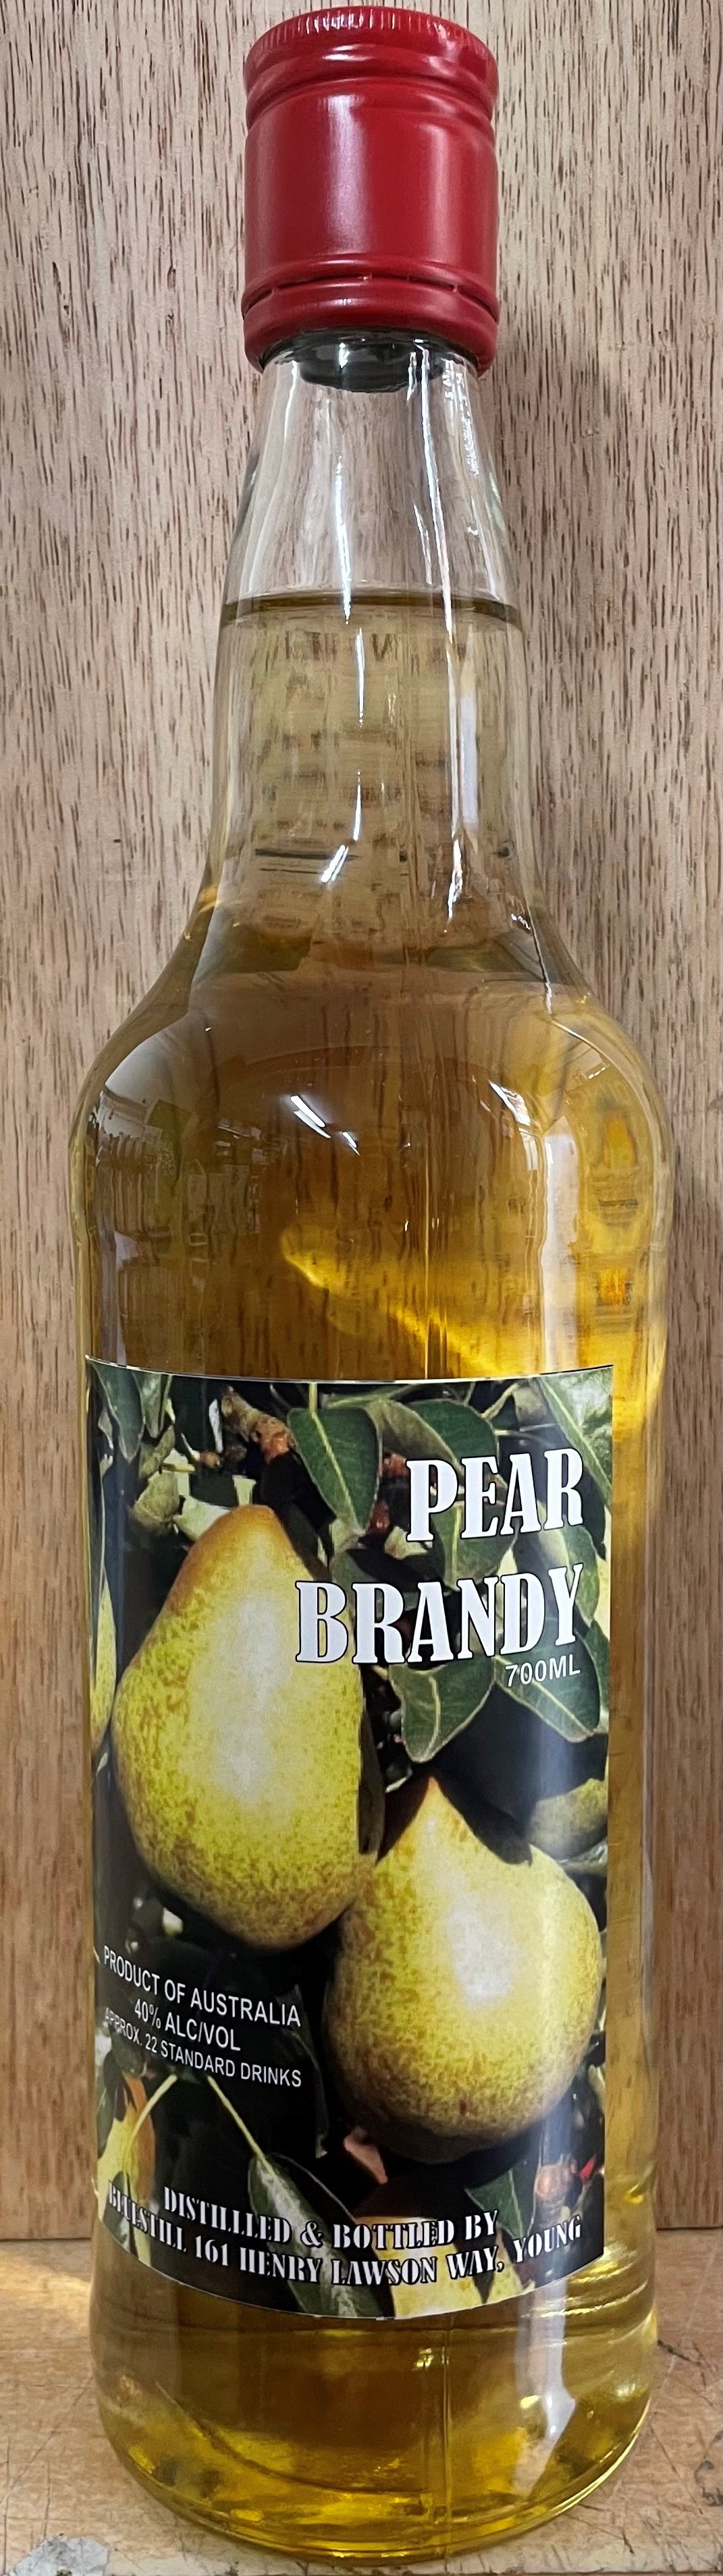 Young Drop-pear Brandy